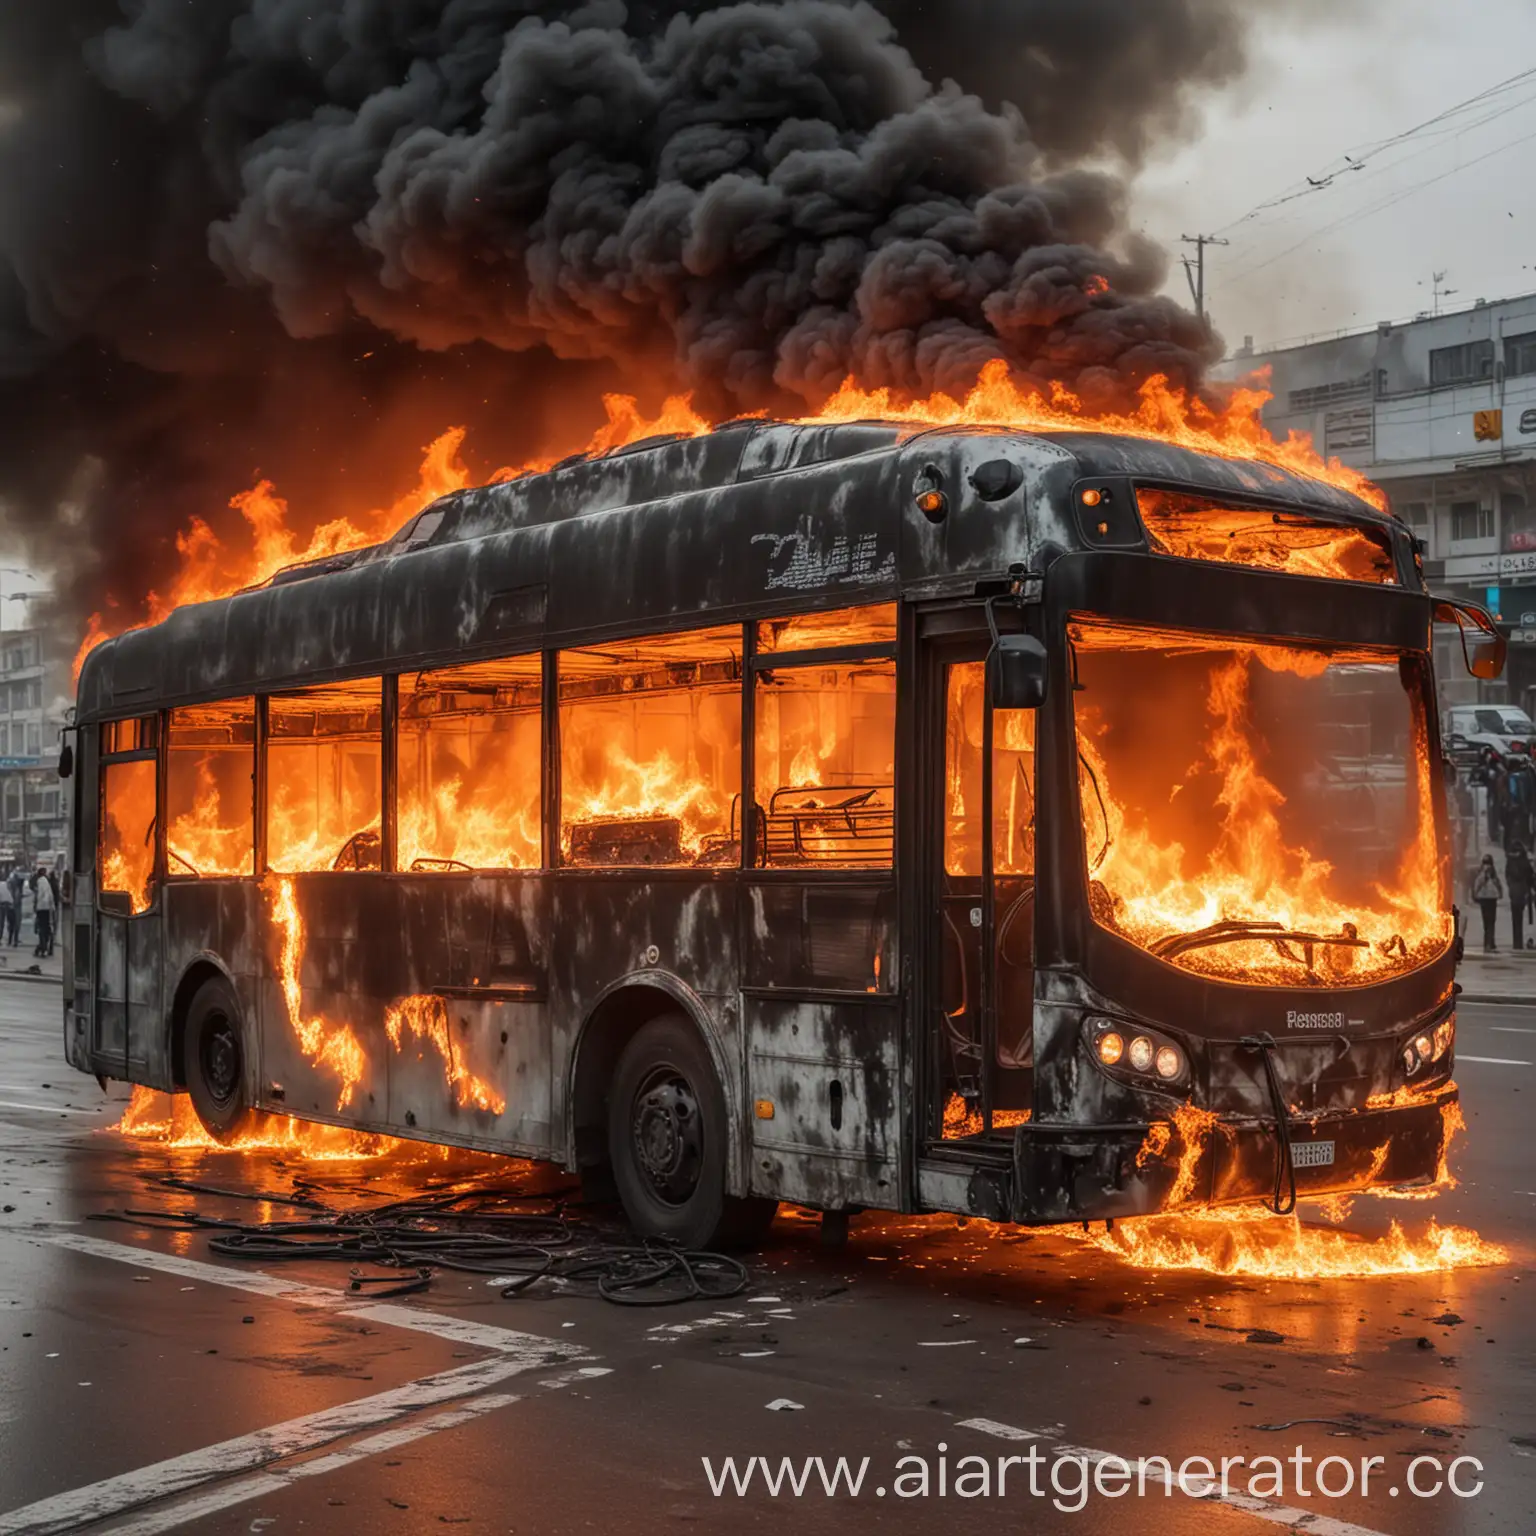 Blazing-Electric-Bus-Inferno-Urban-Fire-Disaster